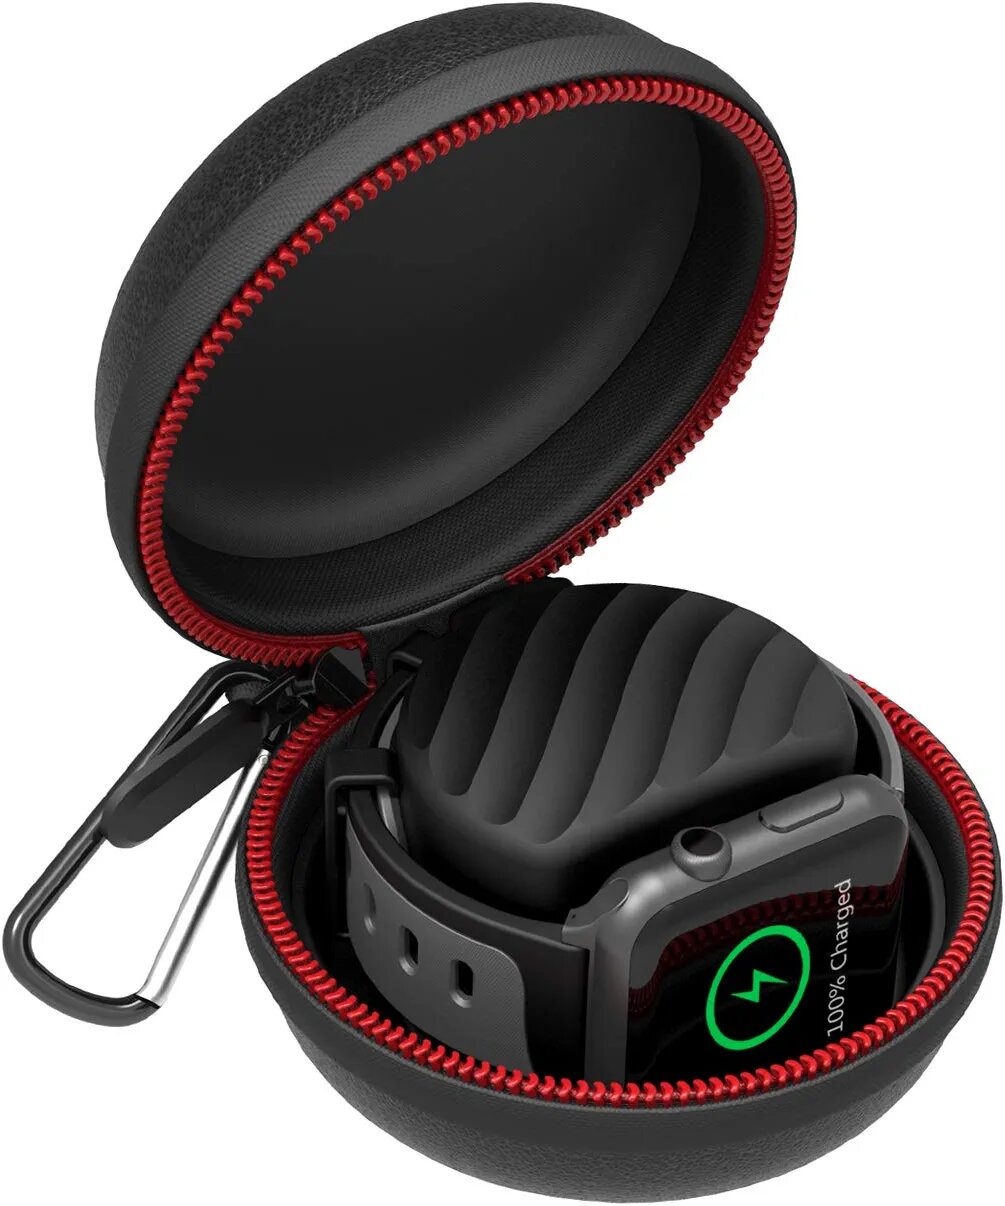 Halleast black and red Apple Watch charging case